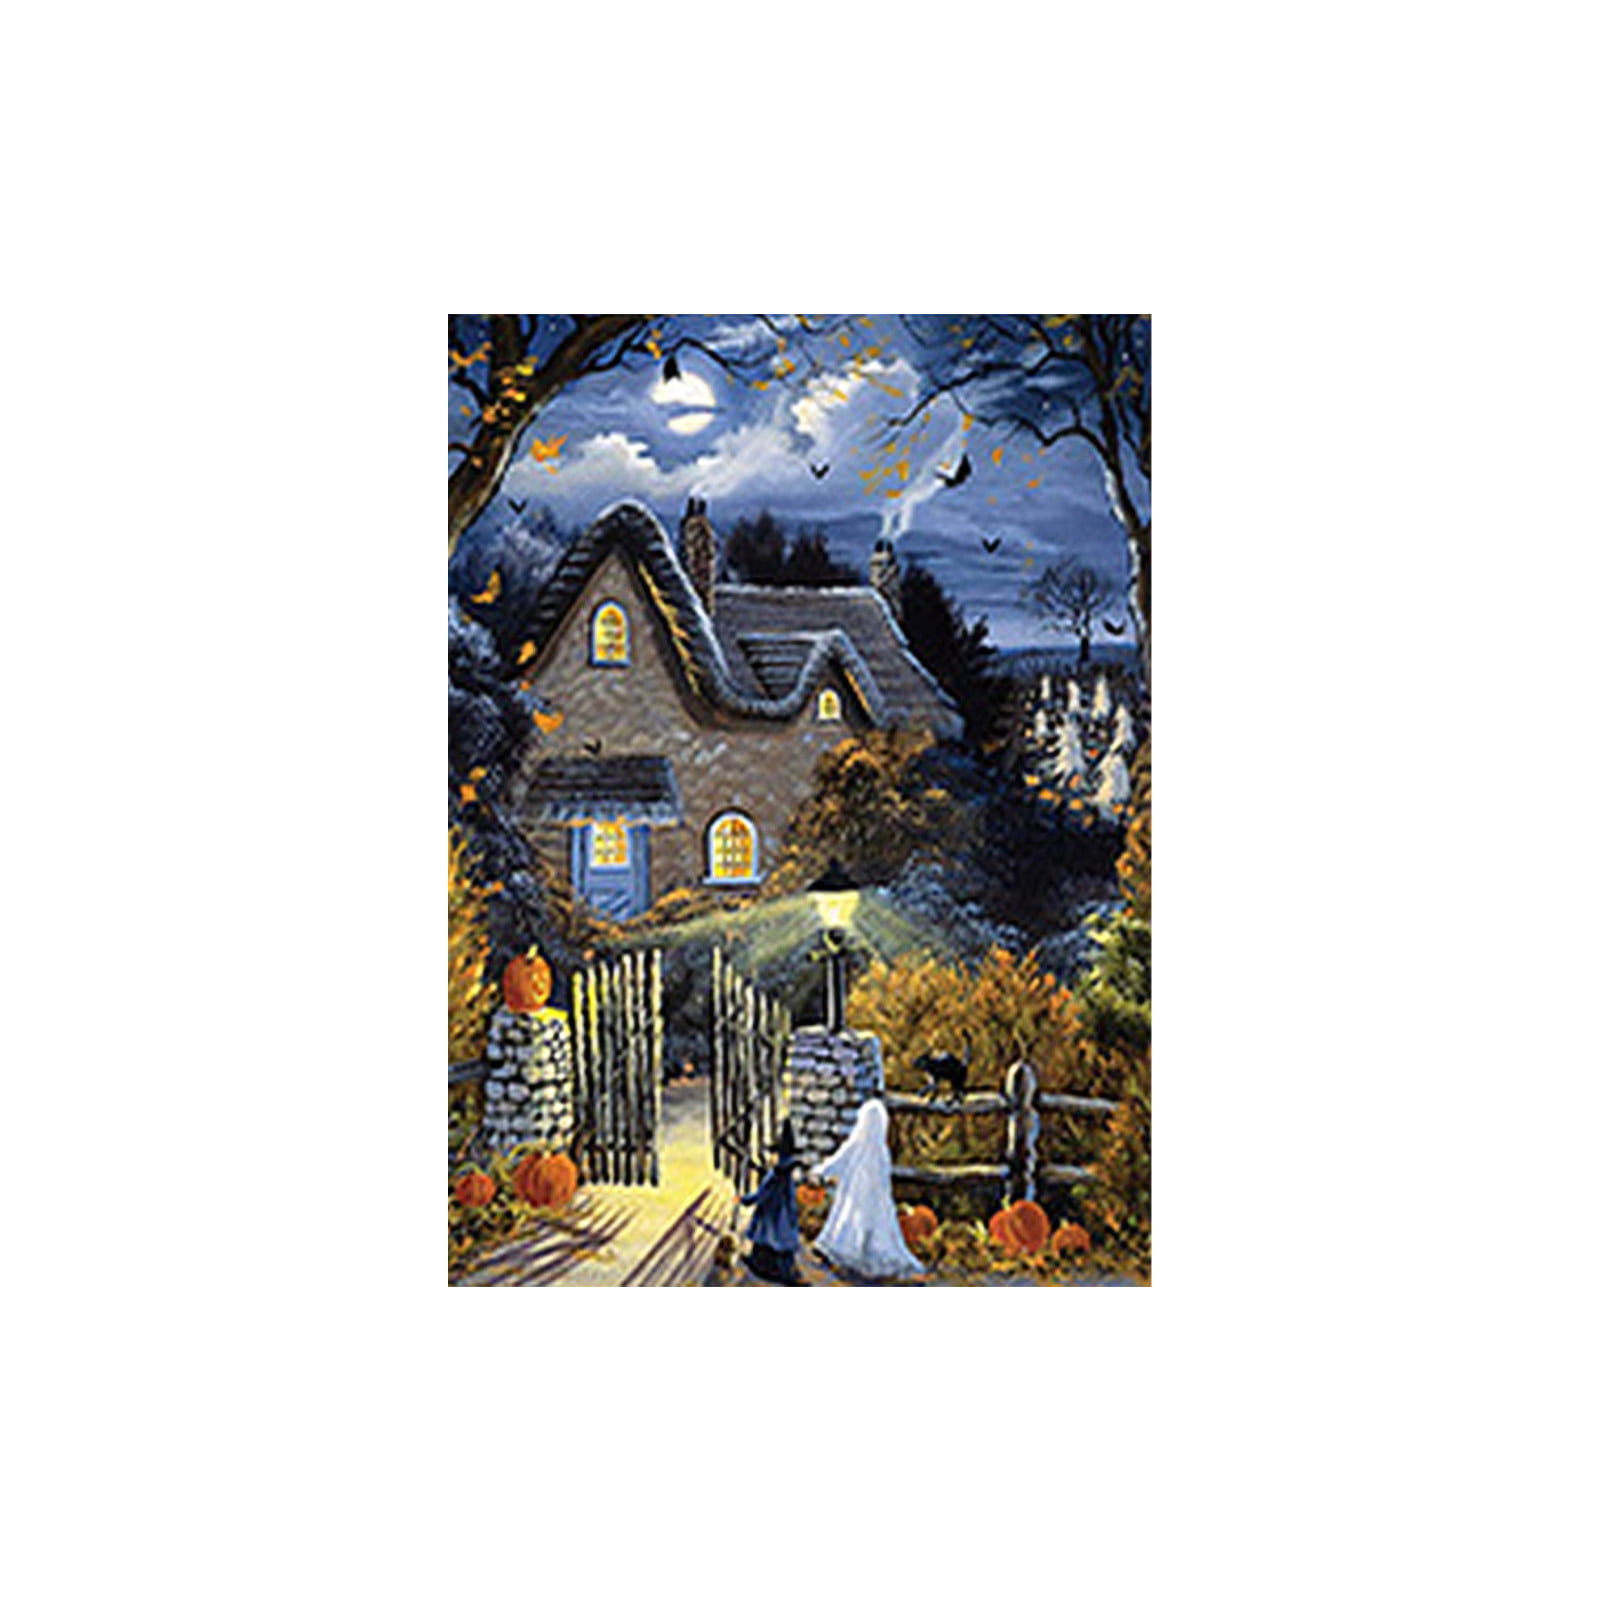 Halloween Ghost Castle 300 Pcs Jigsaw Puzzle Adult Kids Educational Toys Gifts 